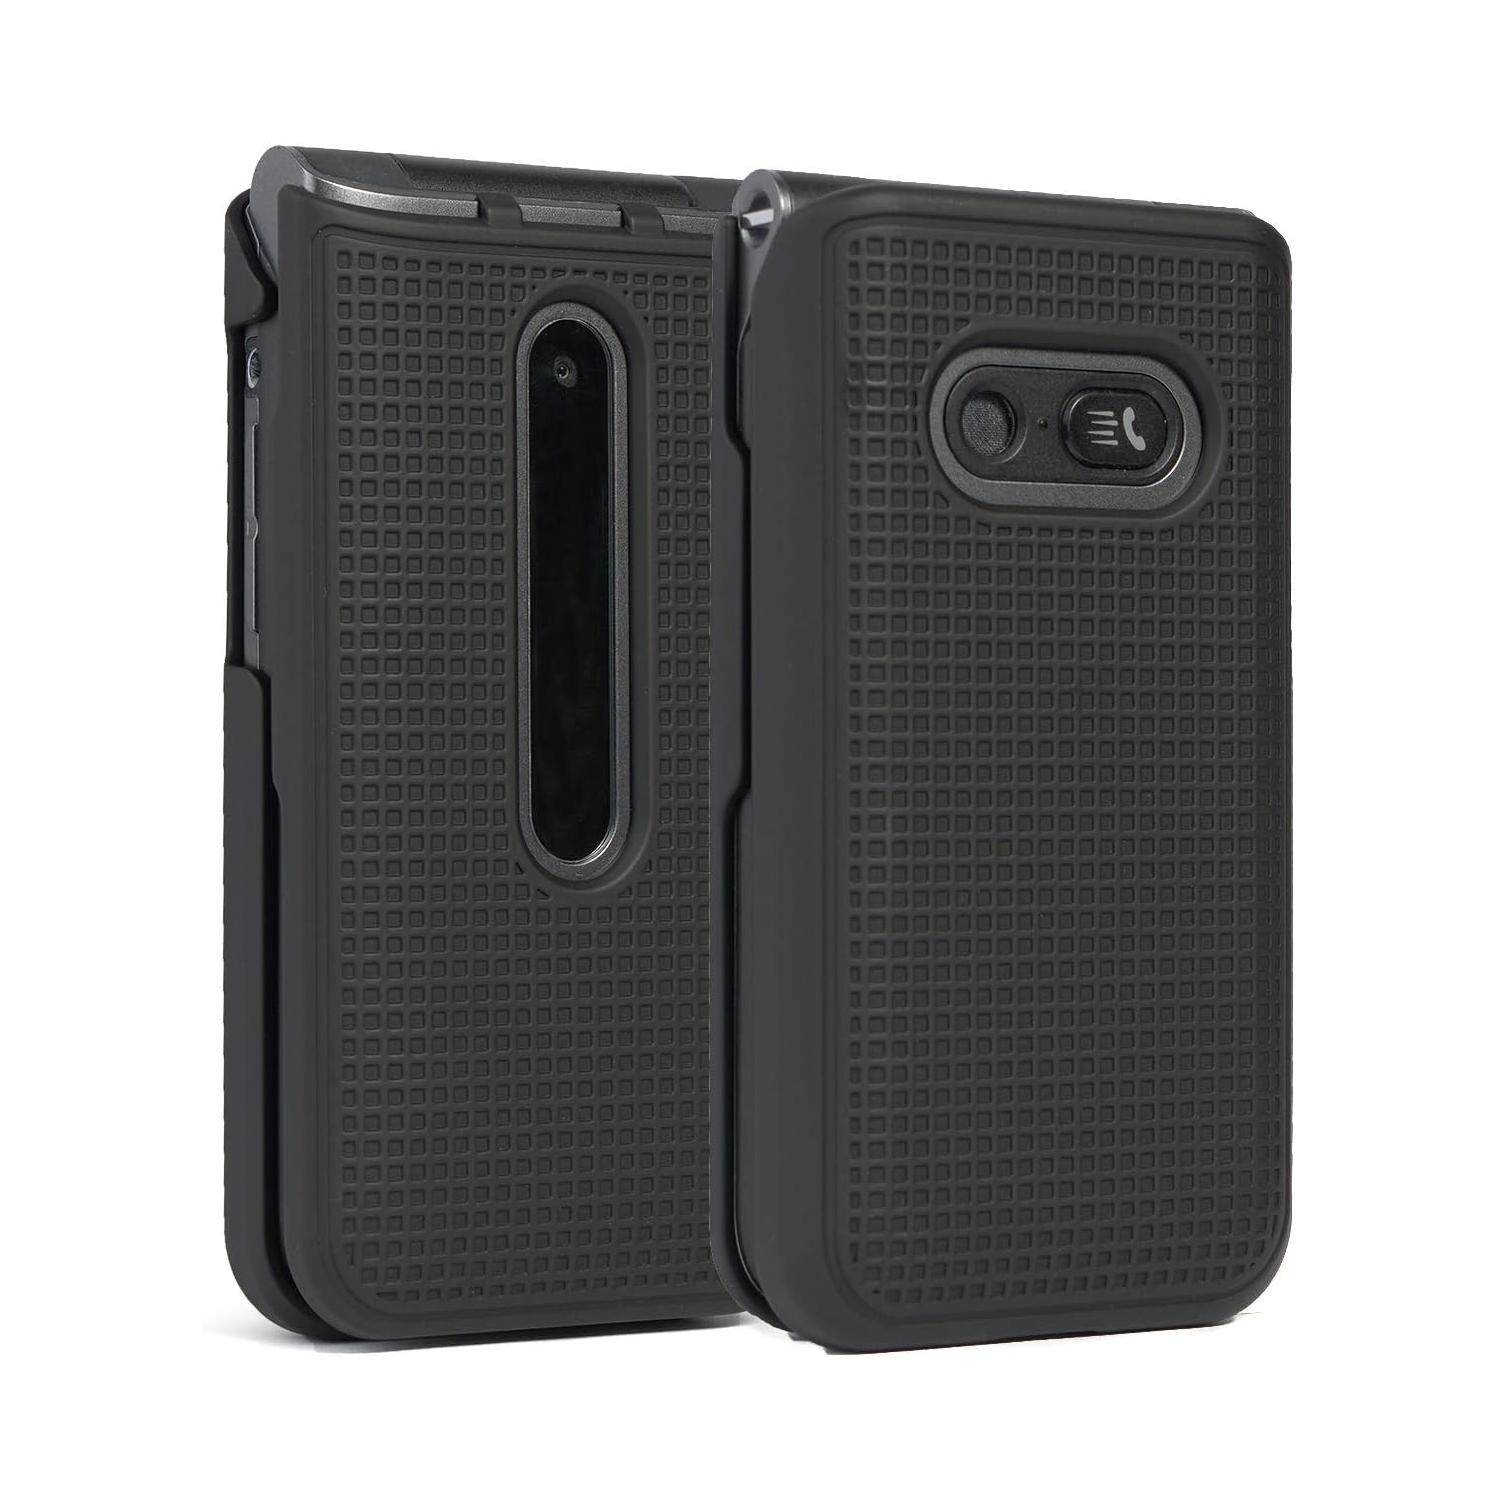 Case for LG Classic Flip, [Black] Protective Snap-On Hard Shell Cover [Grid Texture] for LG Classic Flip